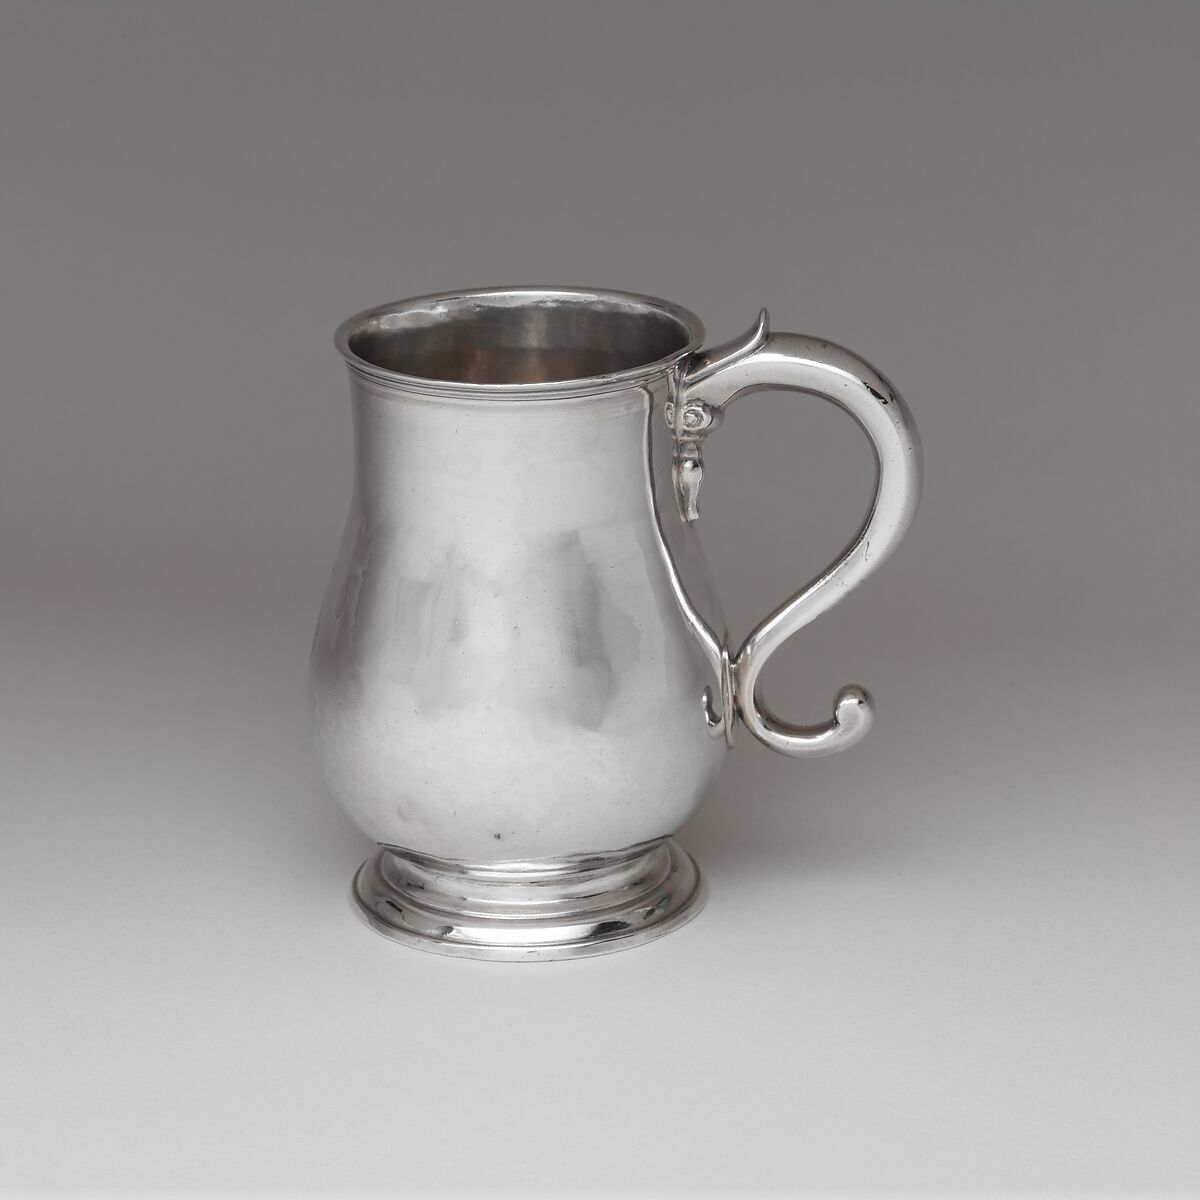 Cann, Possibly by George Hanners Sr. (ca. 1696–1740), Silver, American 